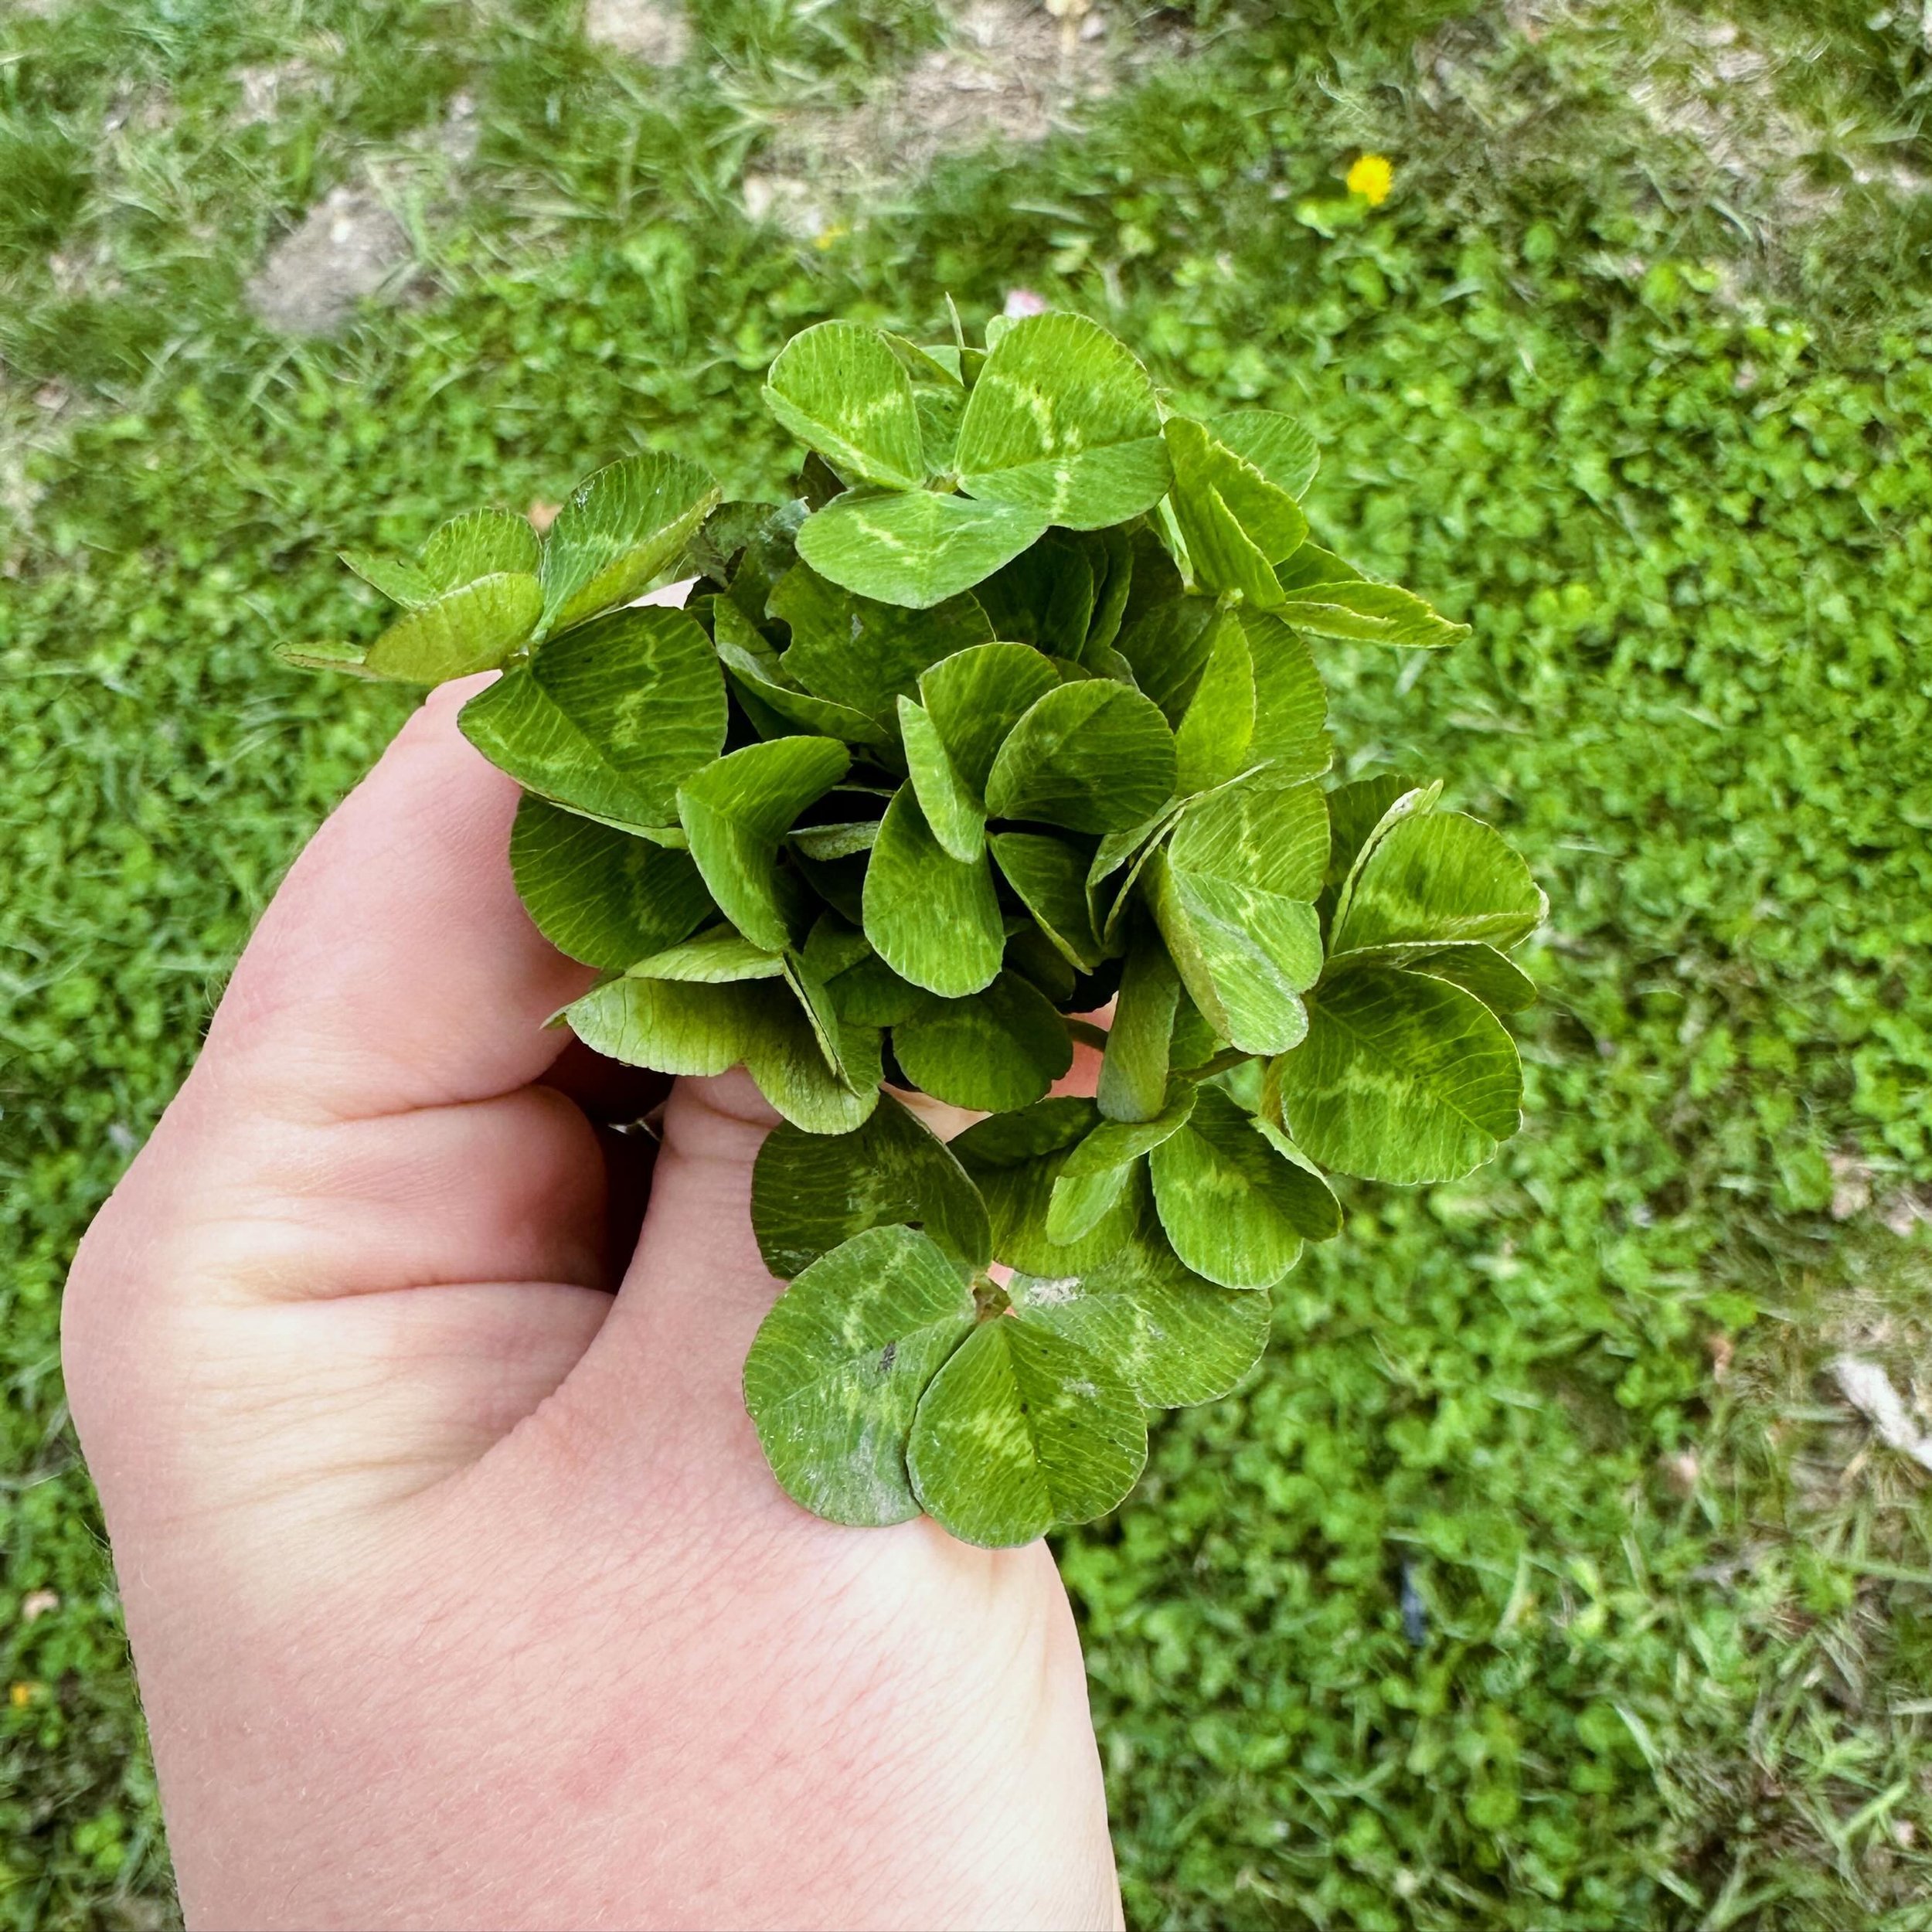 I think we&rsquo;re back in business! Nice bunch from yesterday. It&rsquo;s Wisconsin so it could snow one more time but seems like a good bet we&rsquo;re finally in Spring. 😃
#fourleafclover #🍀 #fourleafcloverhunter